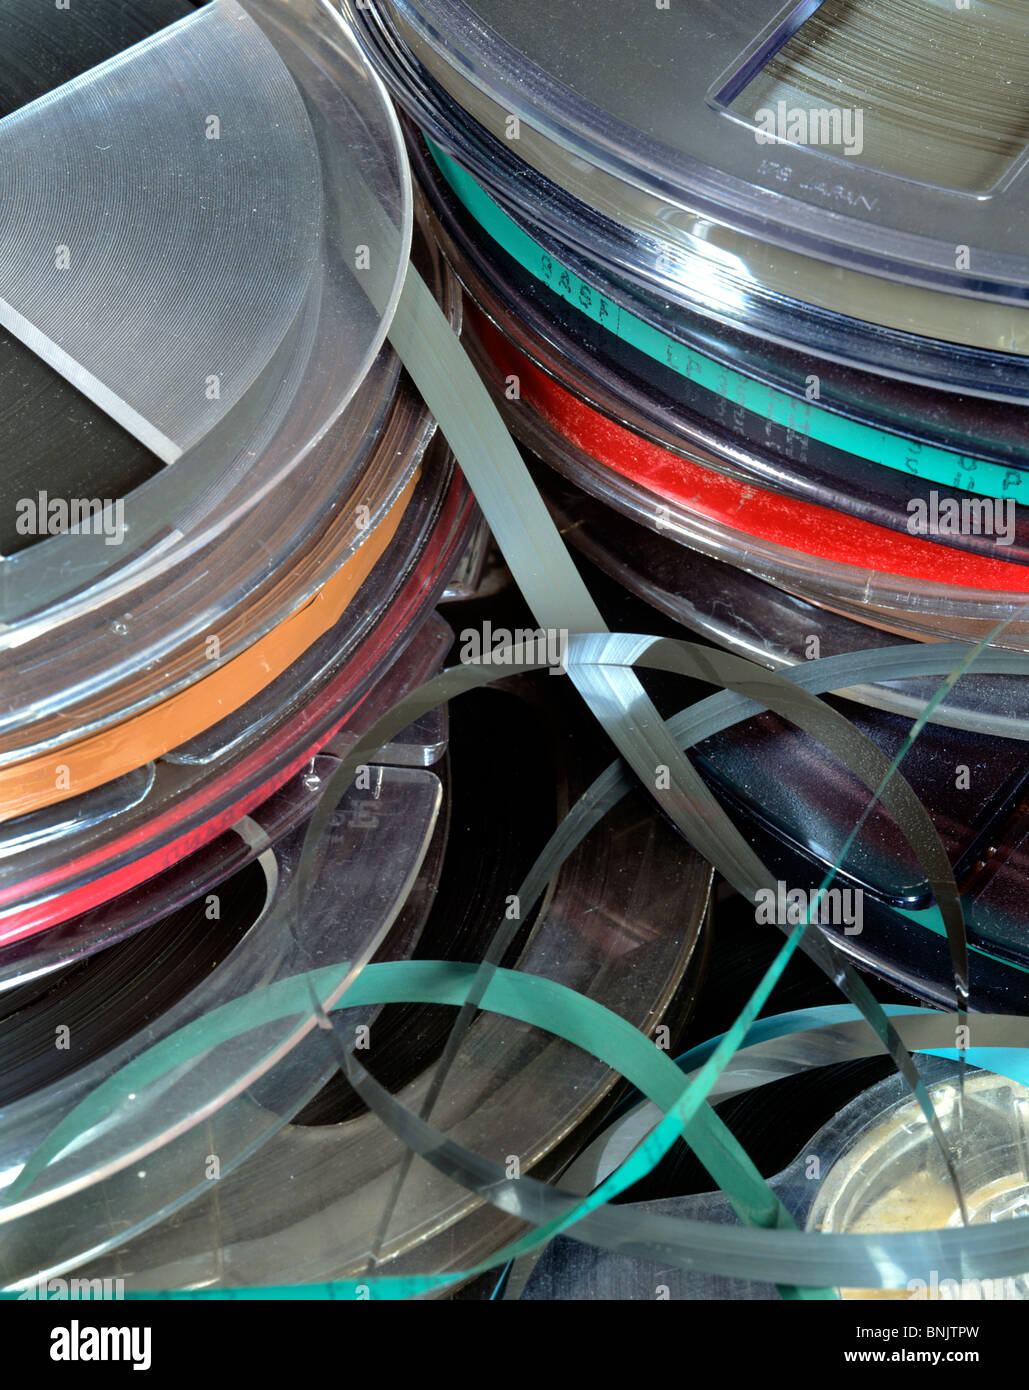 Old-fashioned technology: a pile of reel-to-reel audio tapes Stock Photo